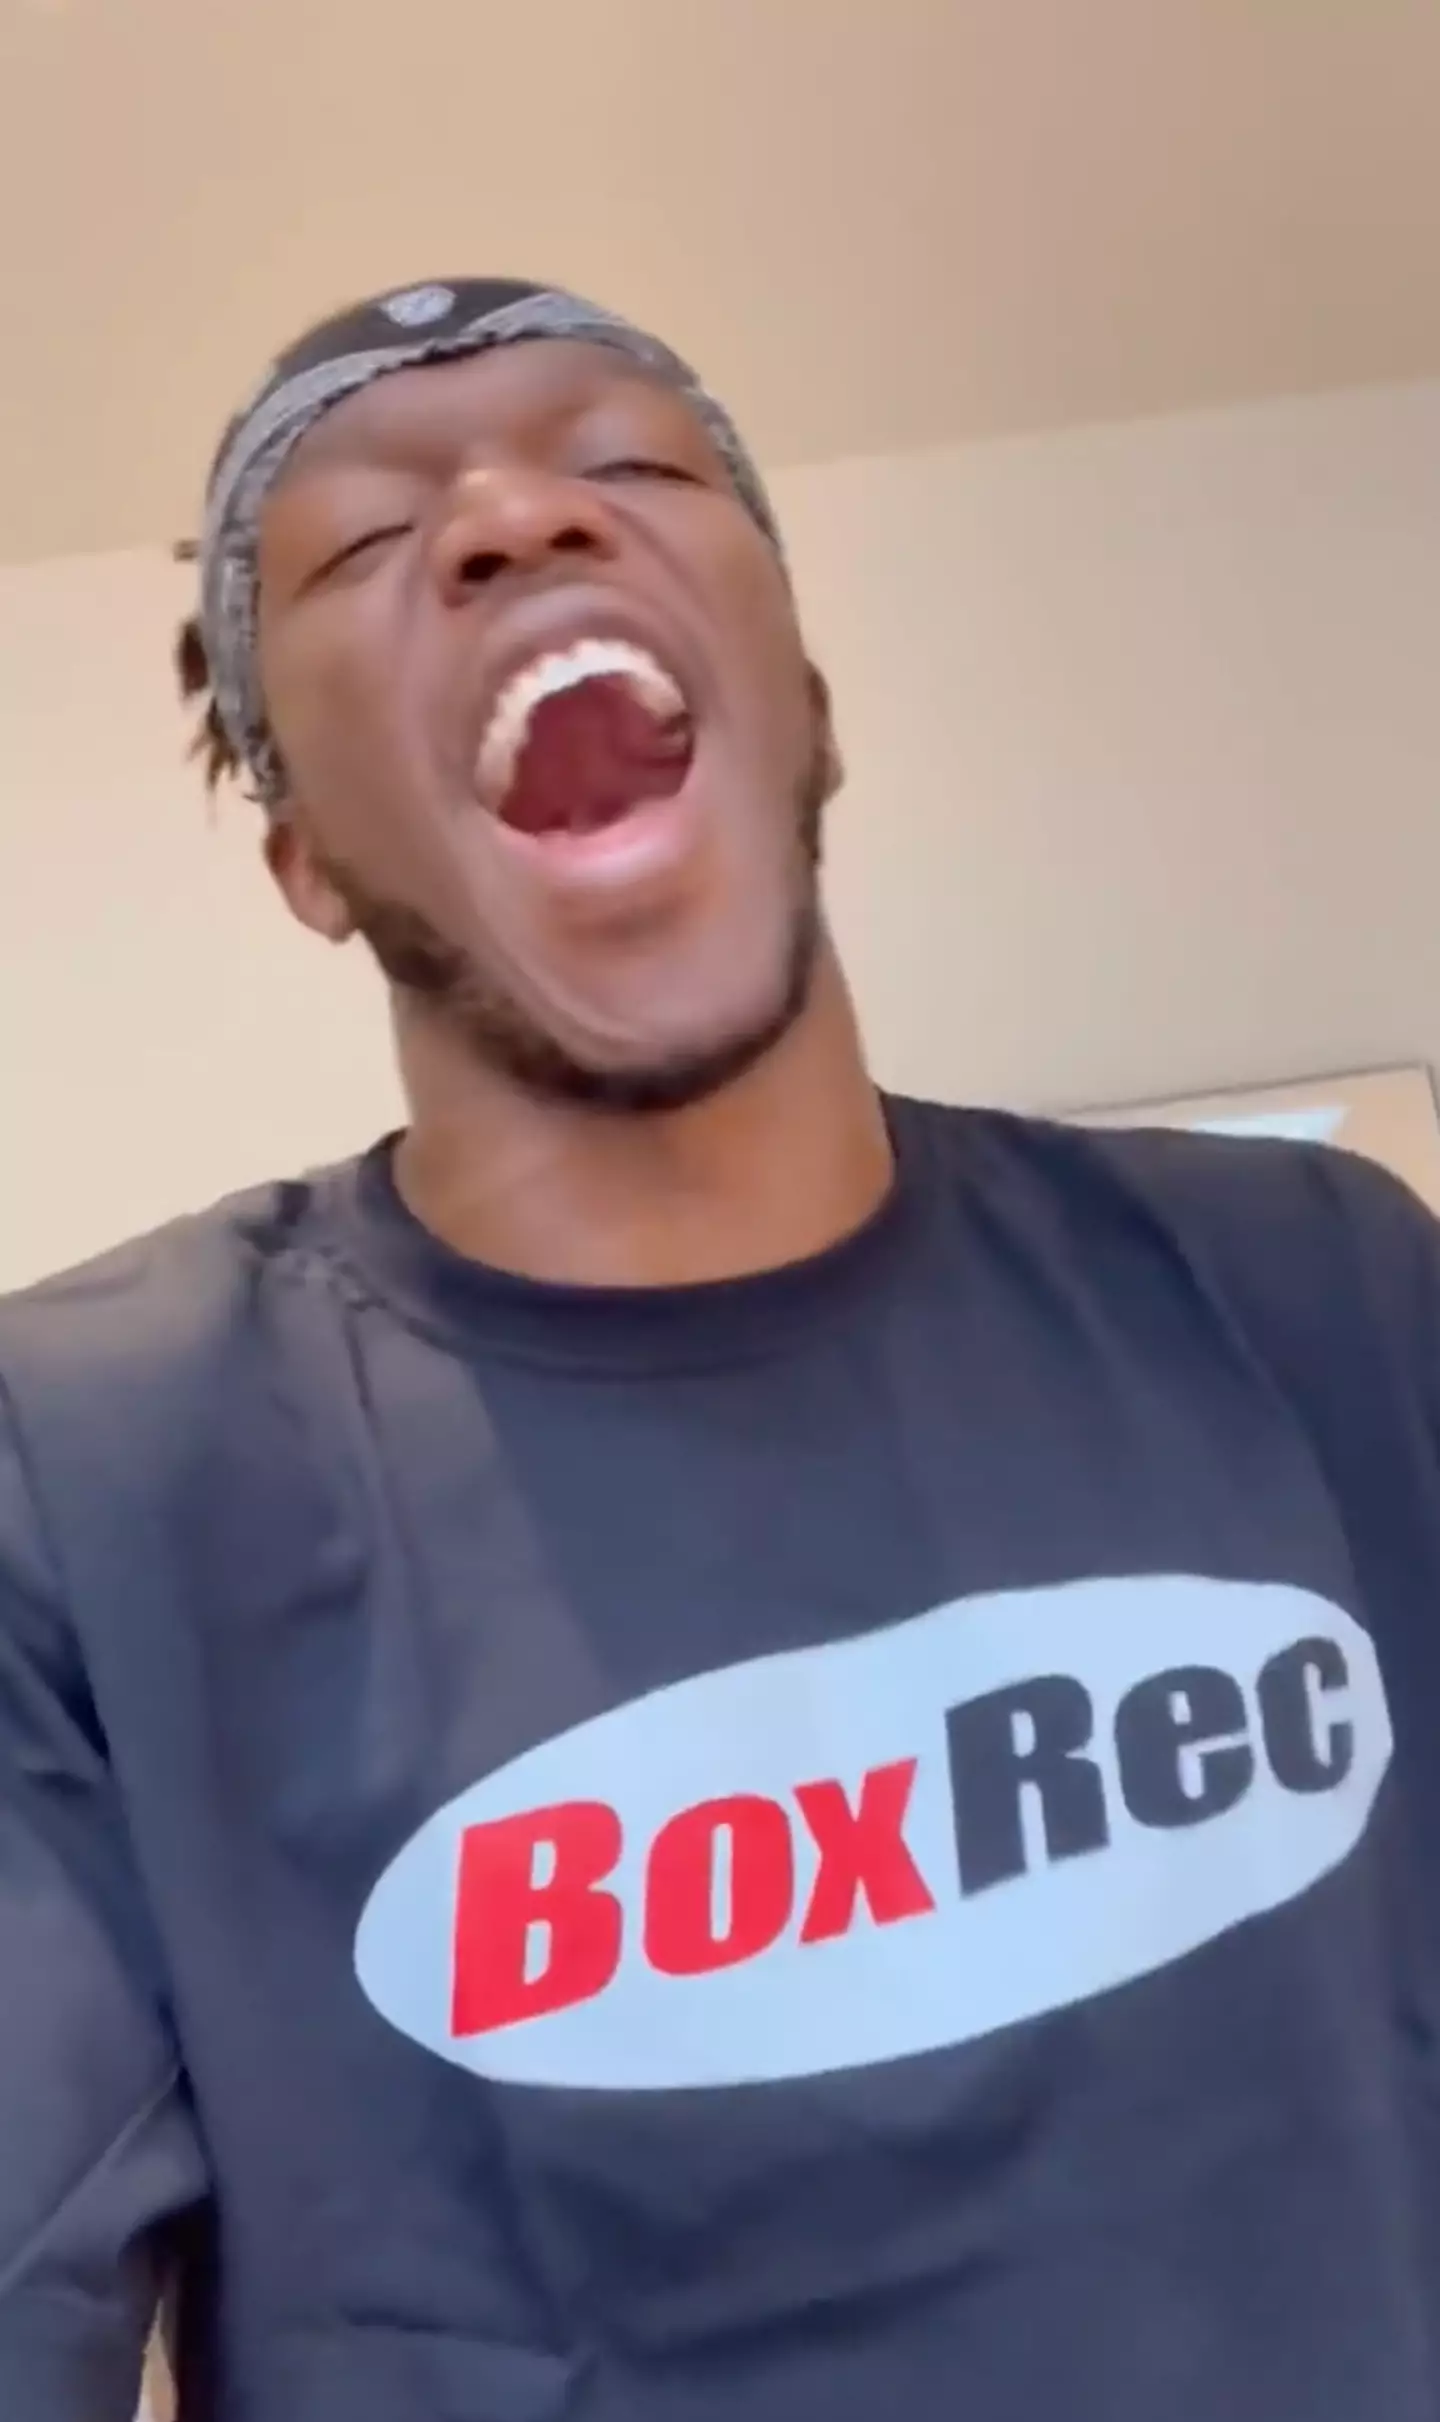 KSI posted his reaction to fans finding out the bout was being listed as a professional fight.